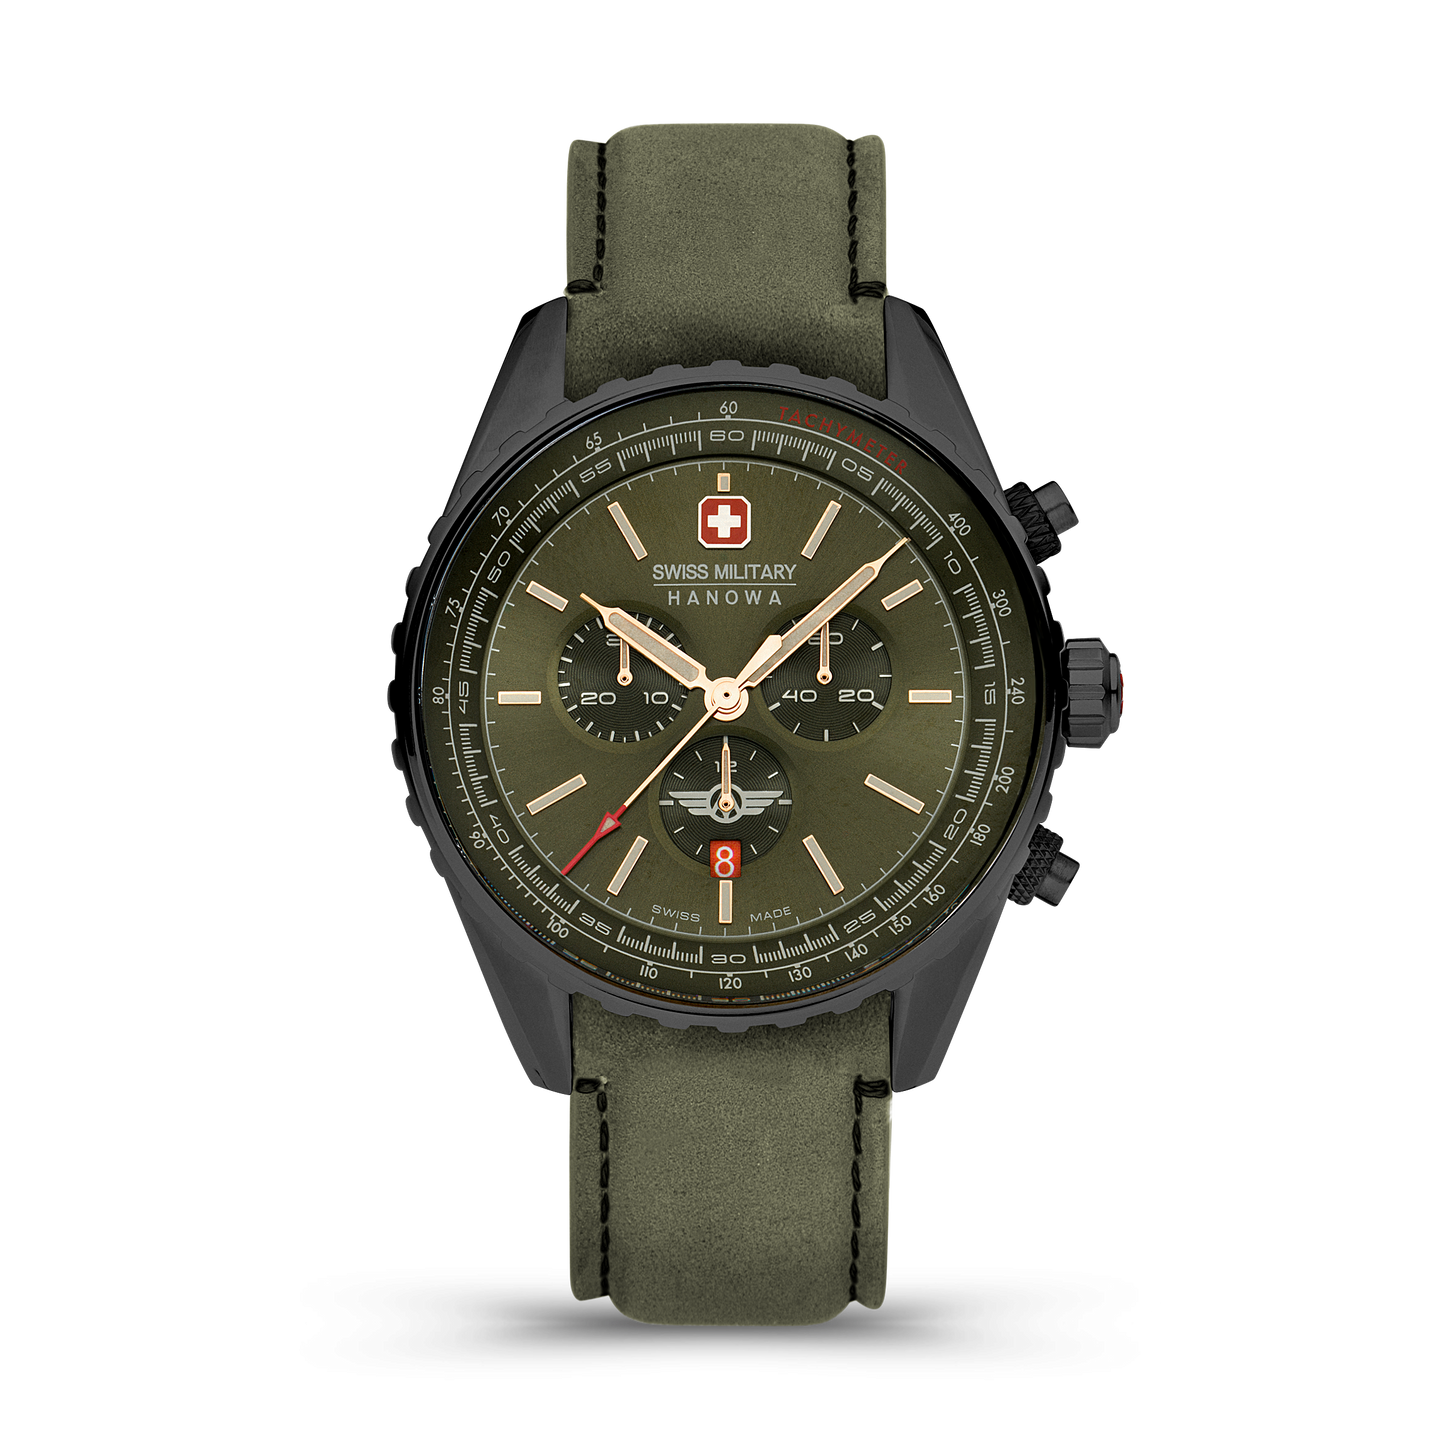 Swiss Military Hanowa Afterburn Chrono. Stainless steel case in gunmetal PDV plating, olive green dial and a genuine olive green Italian leather strap. Front image.